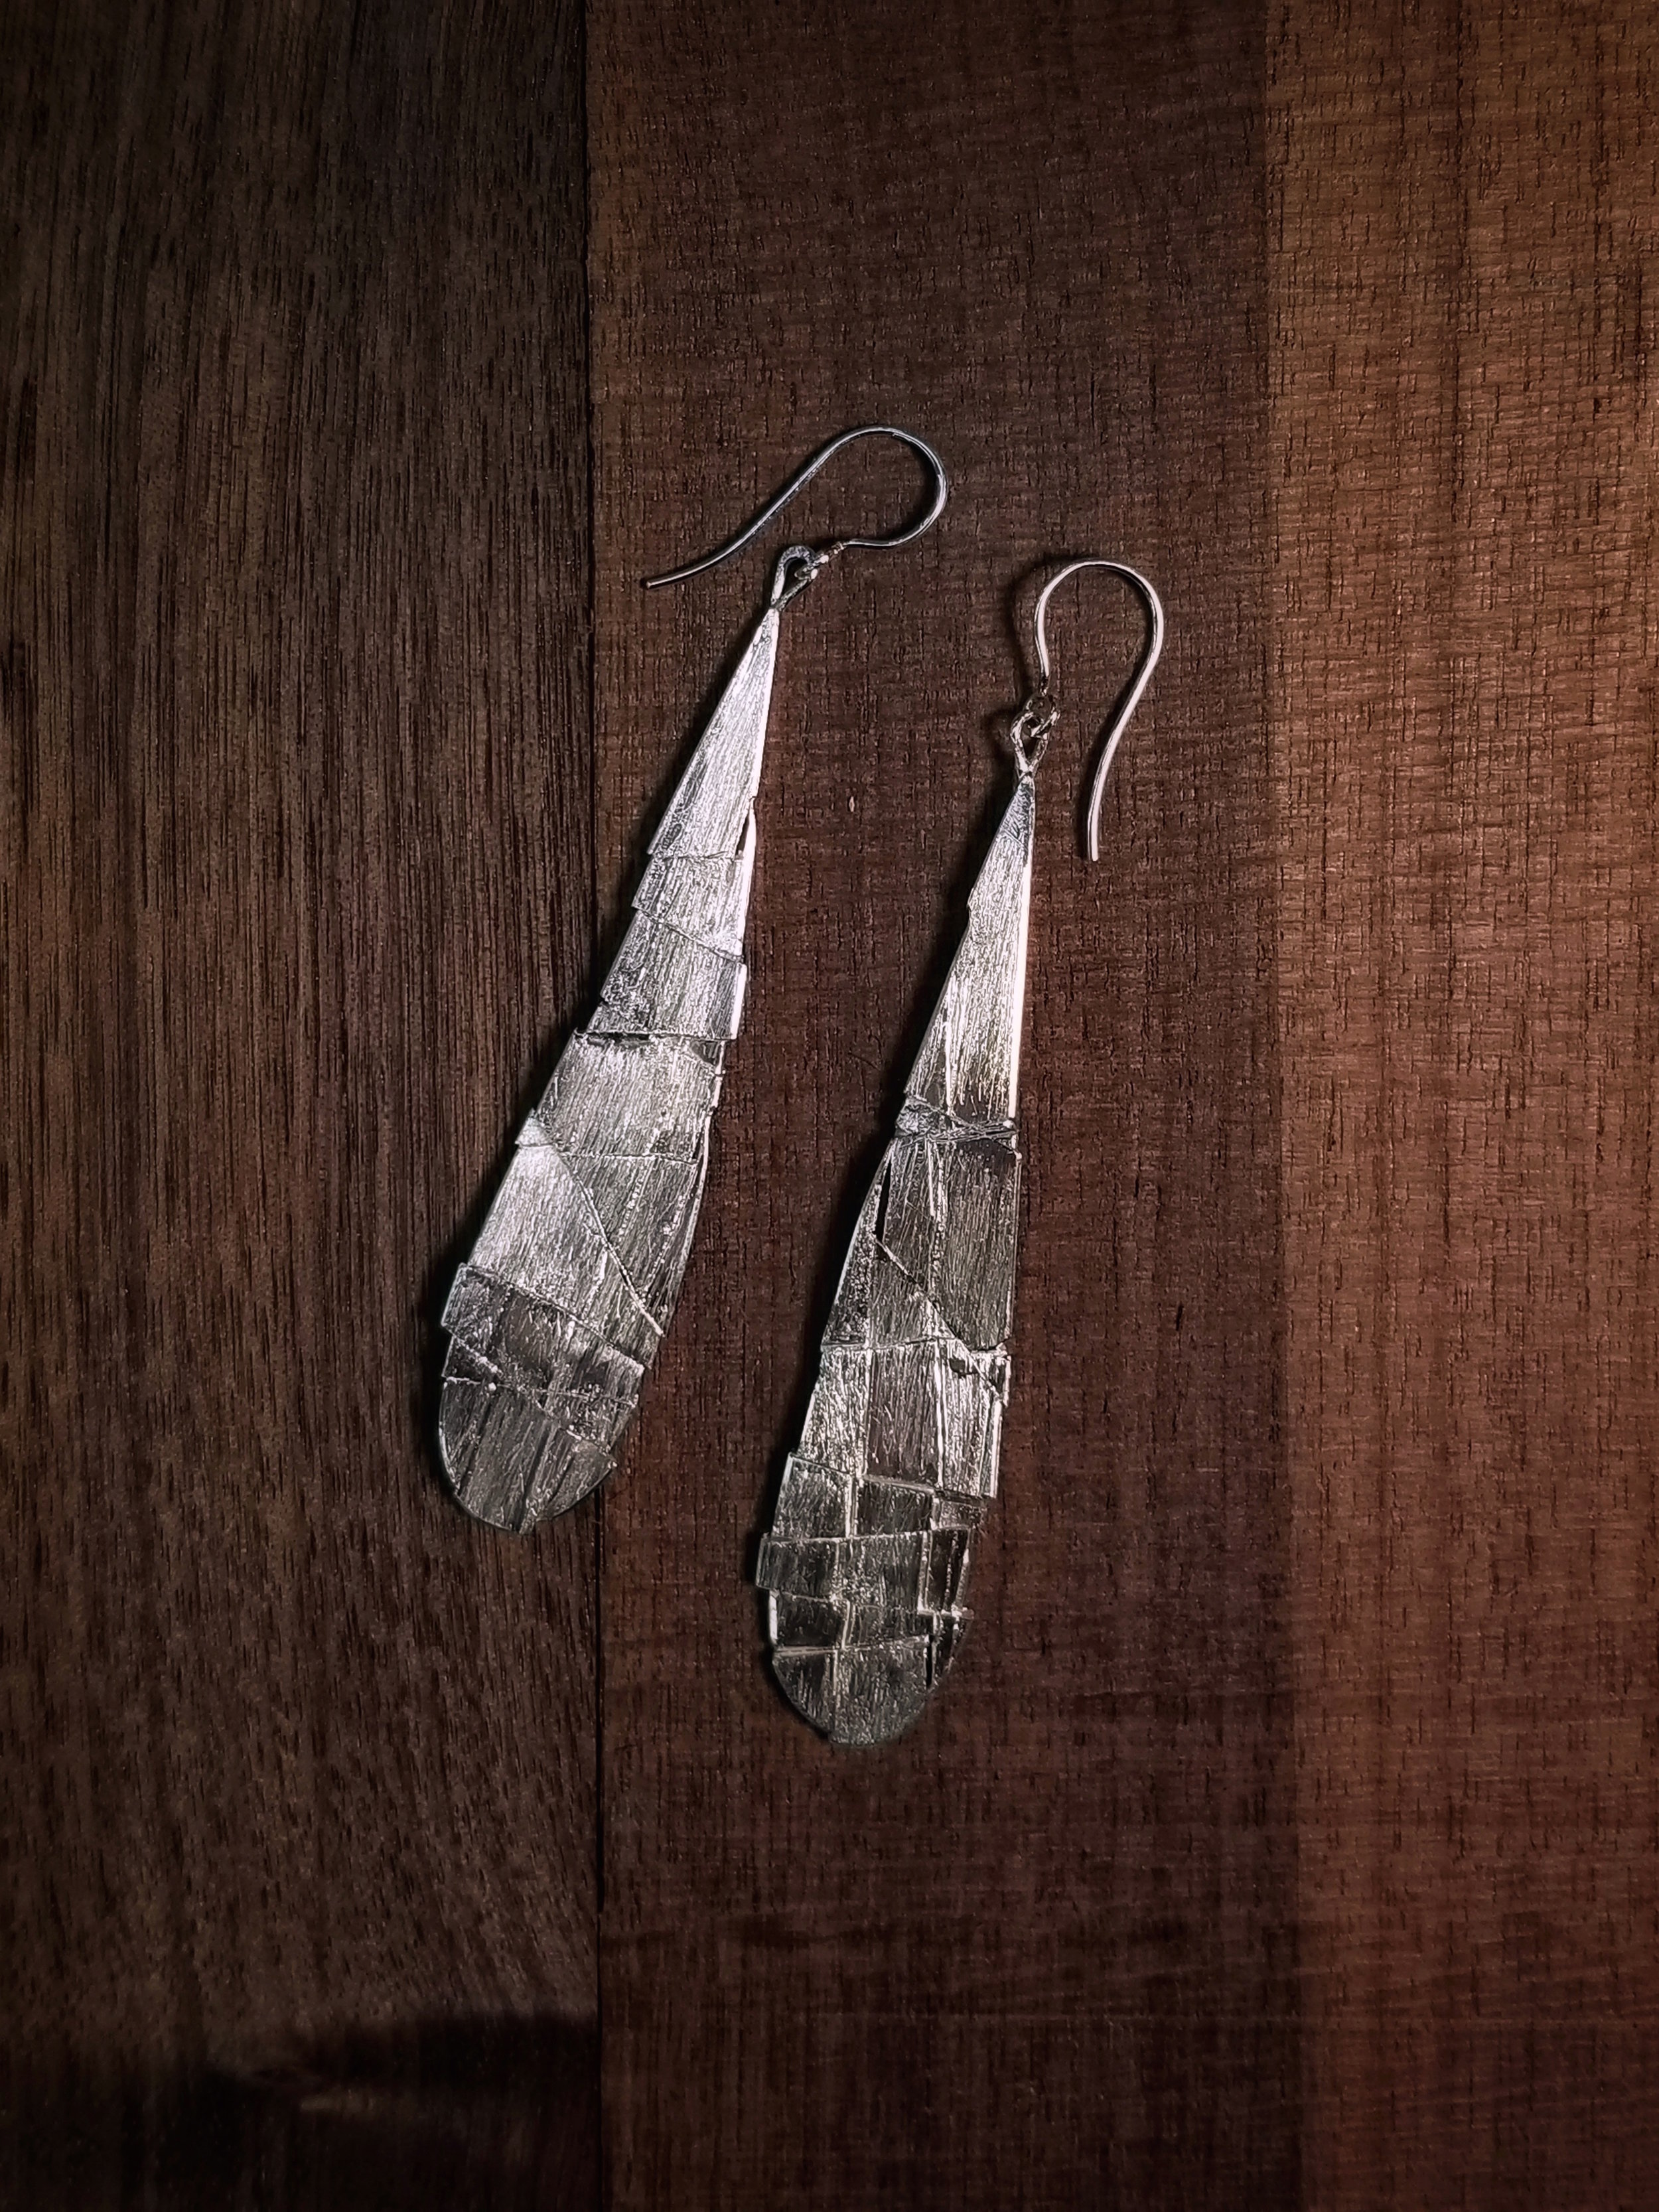  “ Fractured Droplet Earrings ”  Sterling Silver     FRACTURINGS  